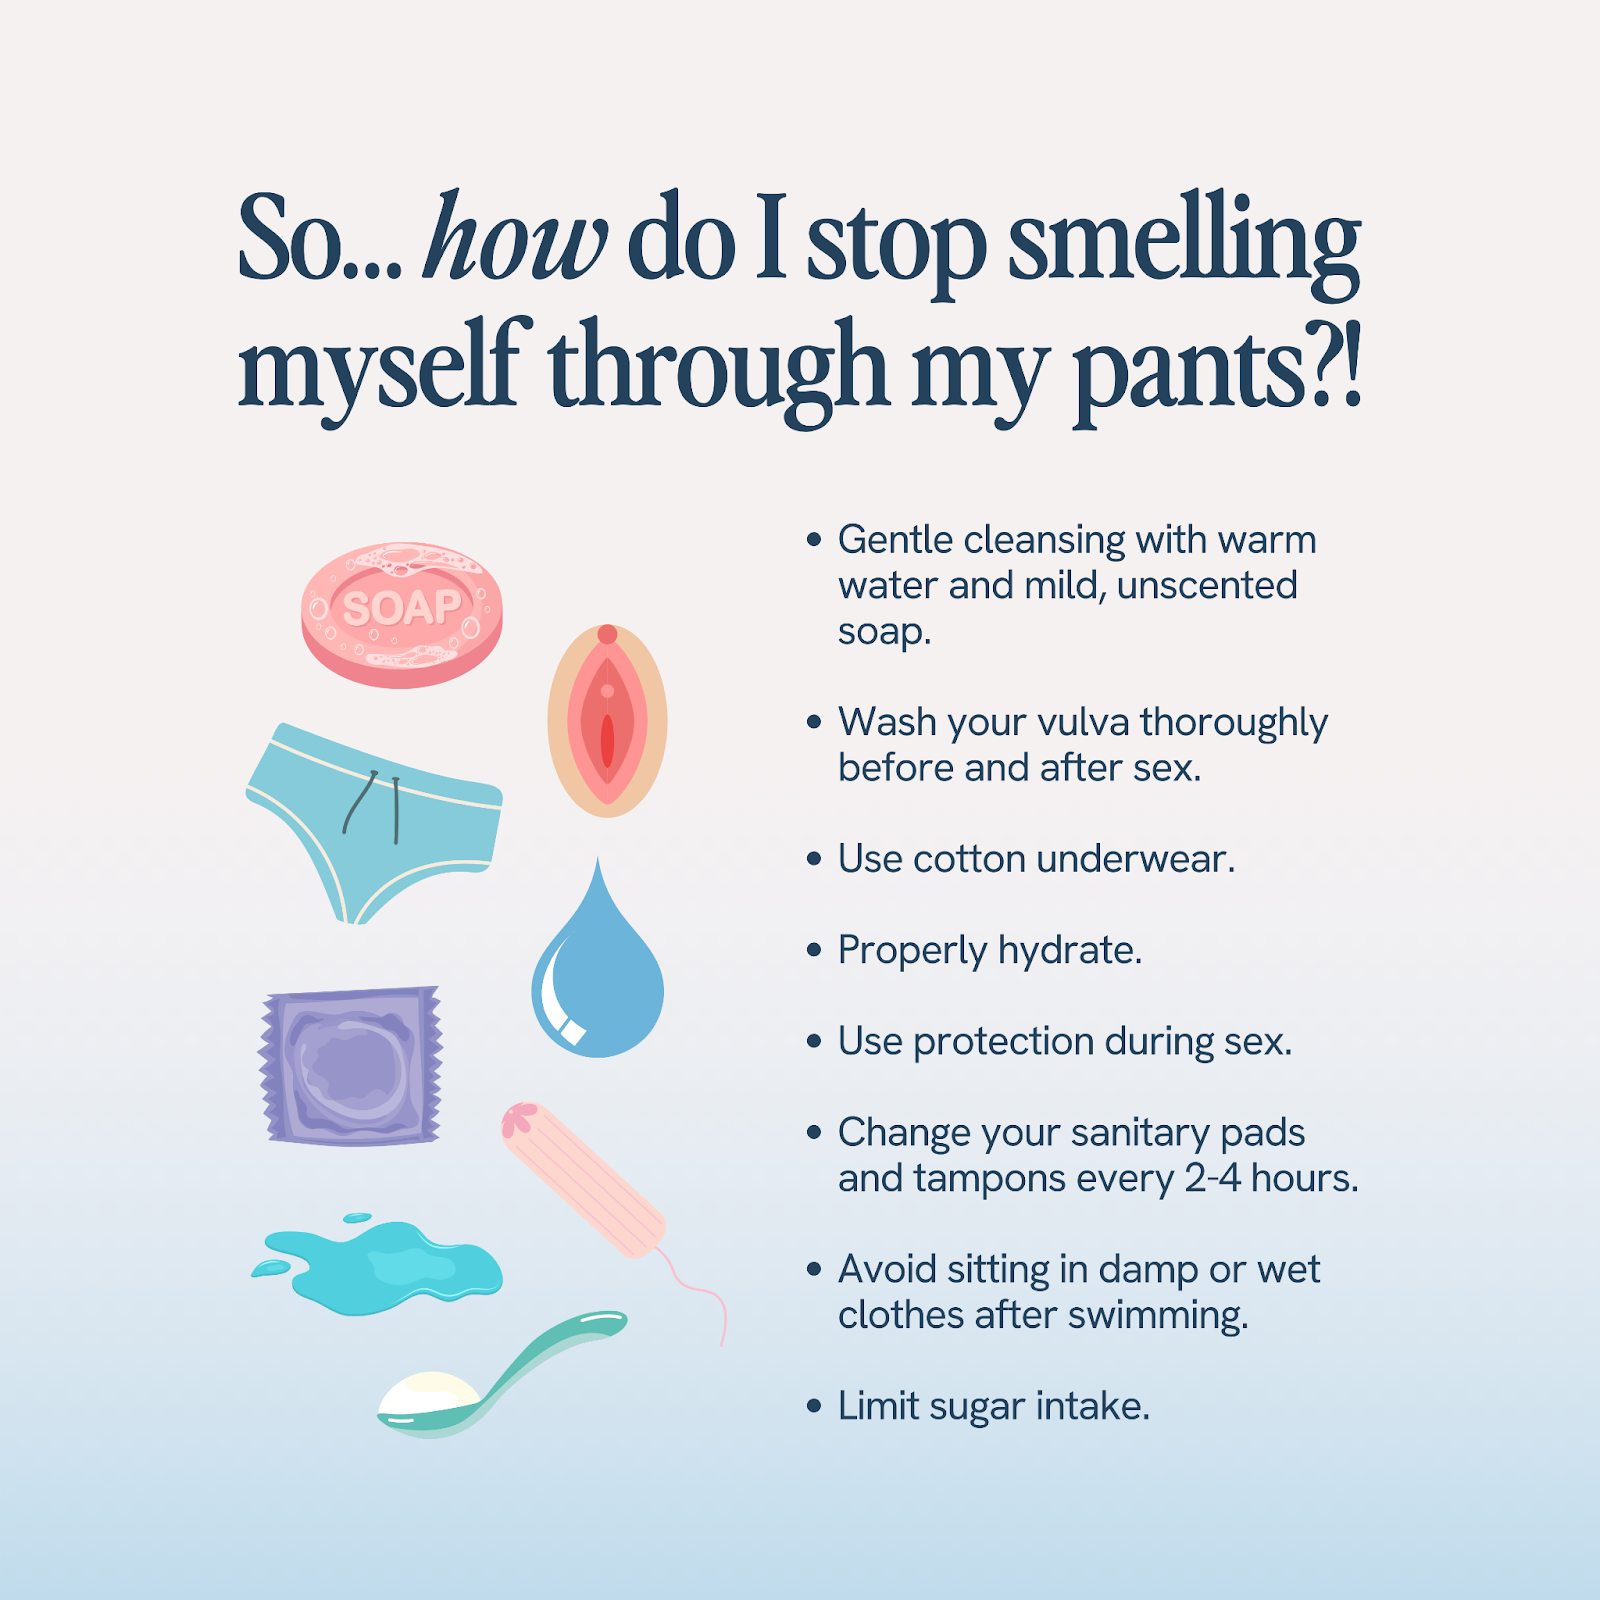 A quick guide on reducing vaginal odor: Use unscented soap, wear cotton underwear, stay hydrated, use protection, change sanitary products regularly, avoid damp clothes, and limit sugar. Illustrated with hygiene-related icons